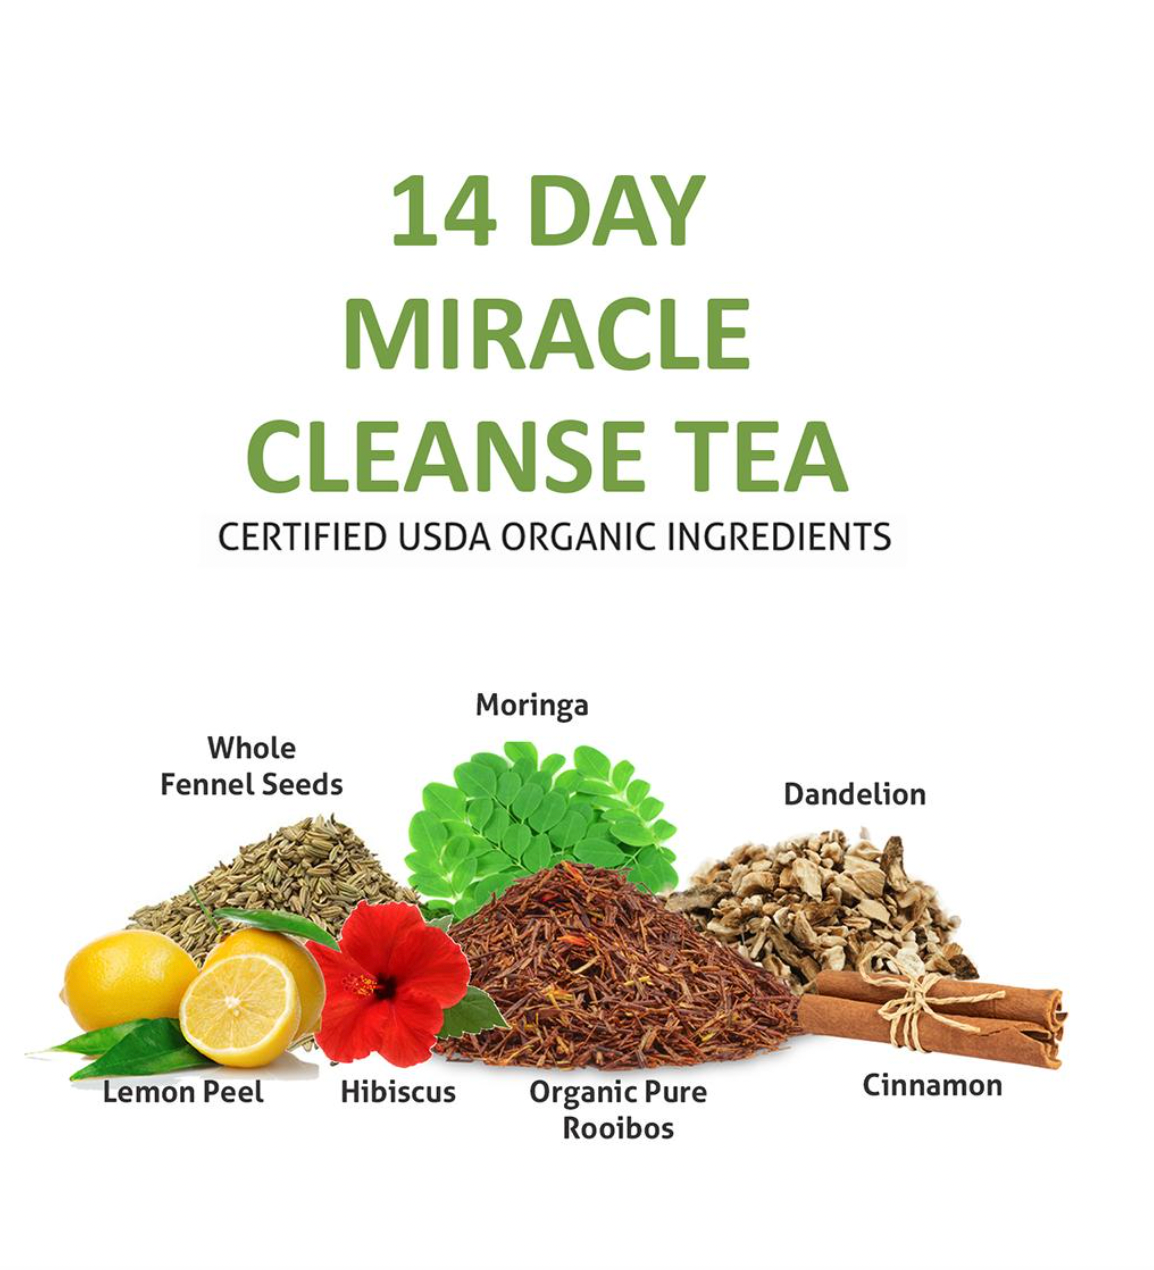 14 Day Miracle Cleanse